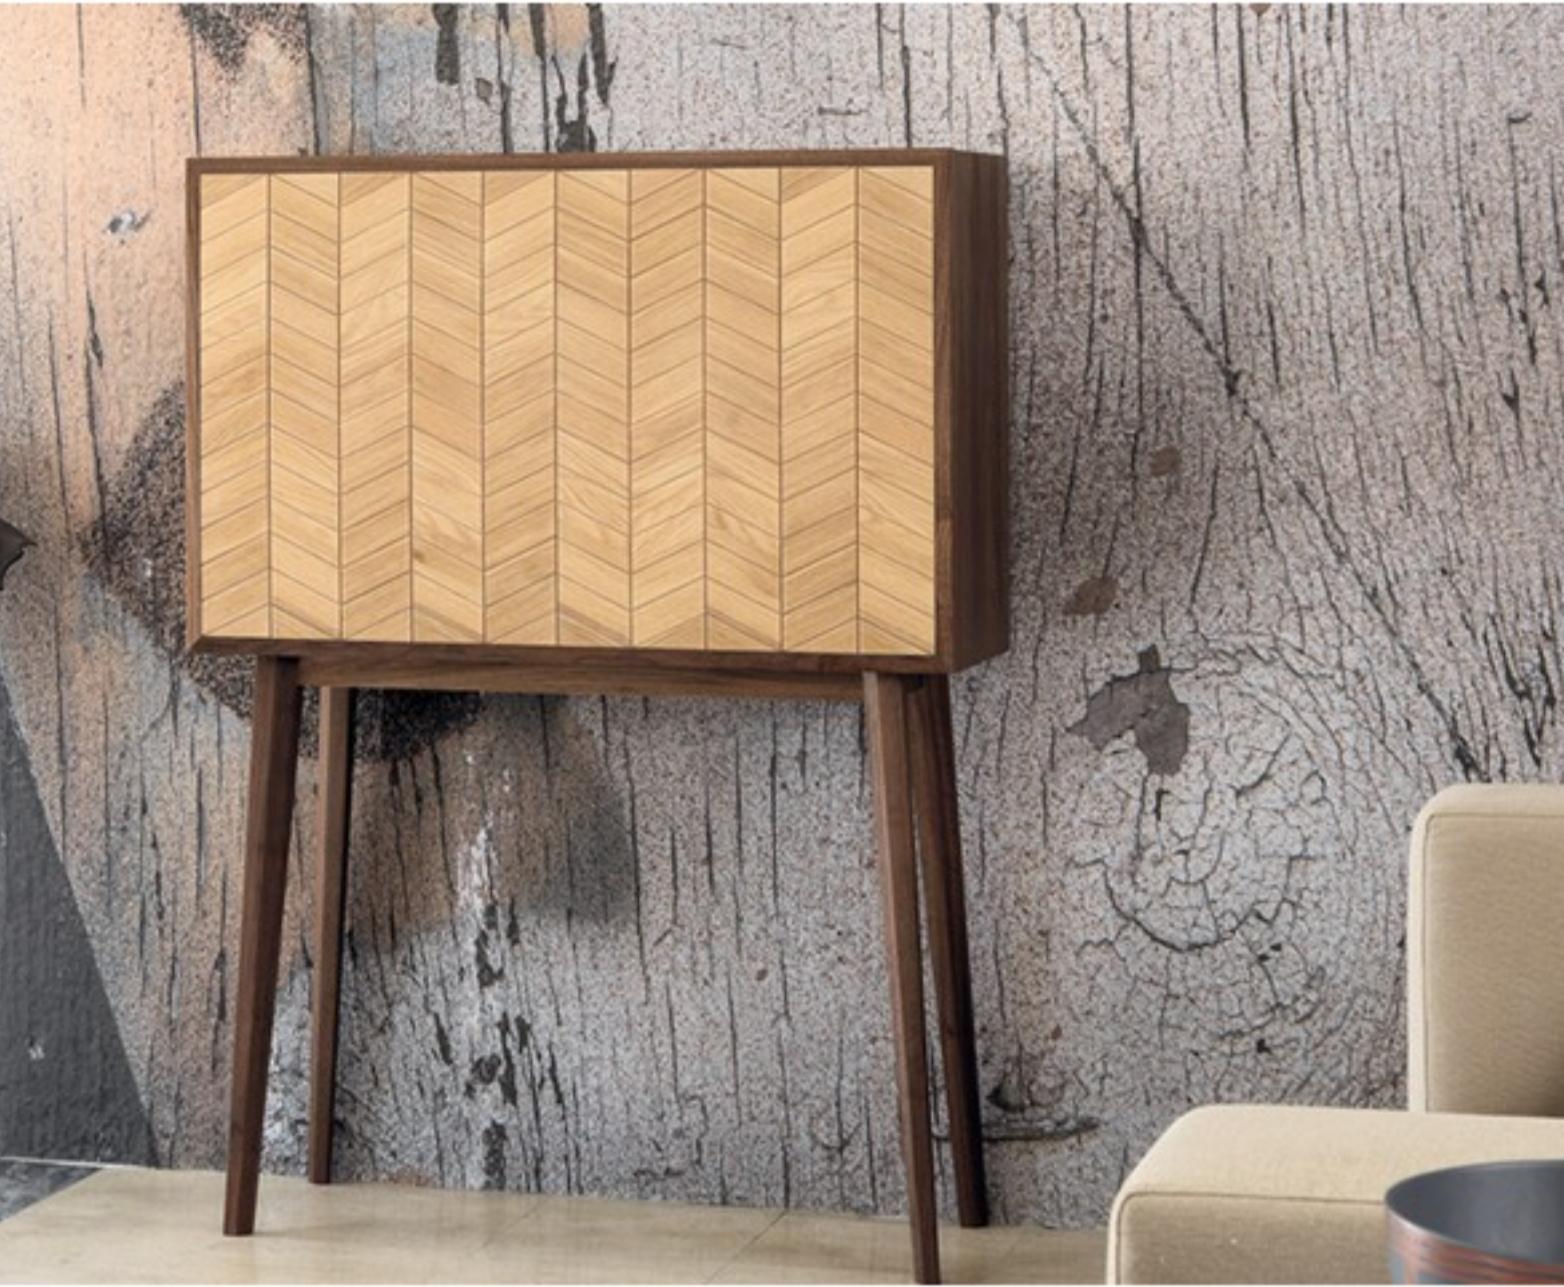 This versatile piece with structure and door in solid walnut, beautiful herringbone pattern in the door in solid oak. Fully adjustable interior that can be turned as a Bar, a Desk or a Sideboard.
It excels for its elegant design and attention to